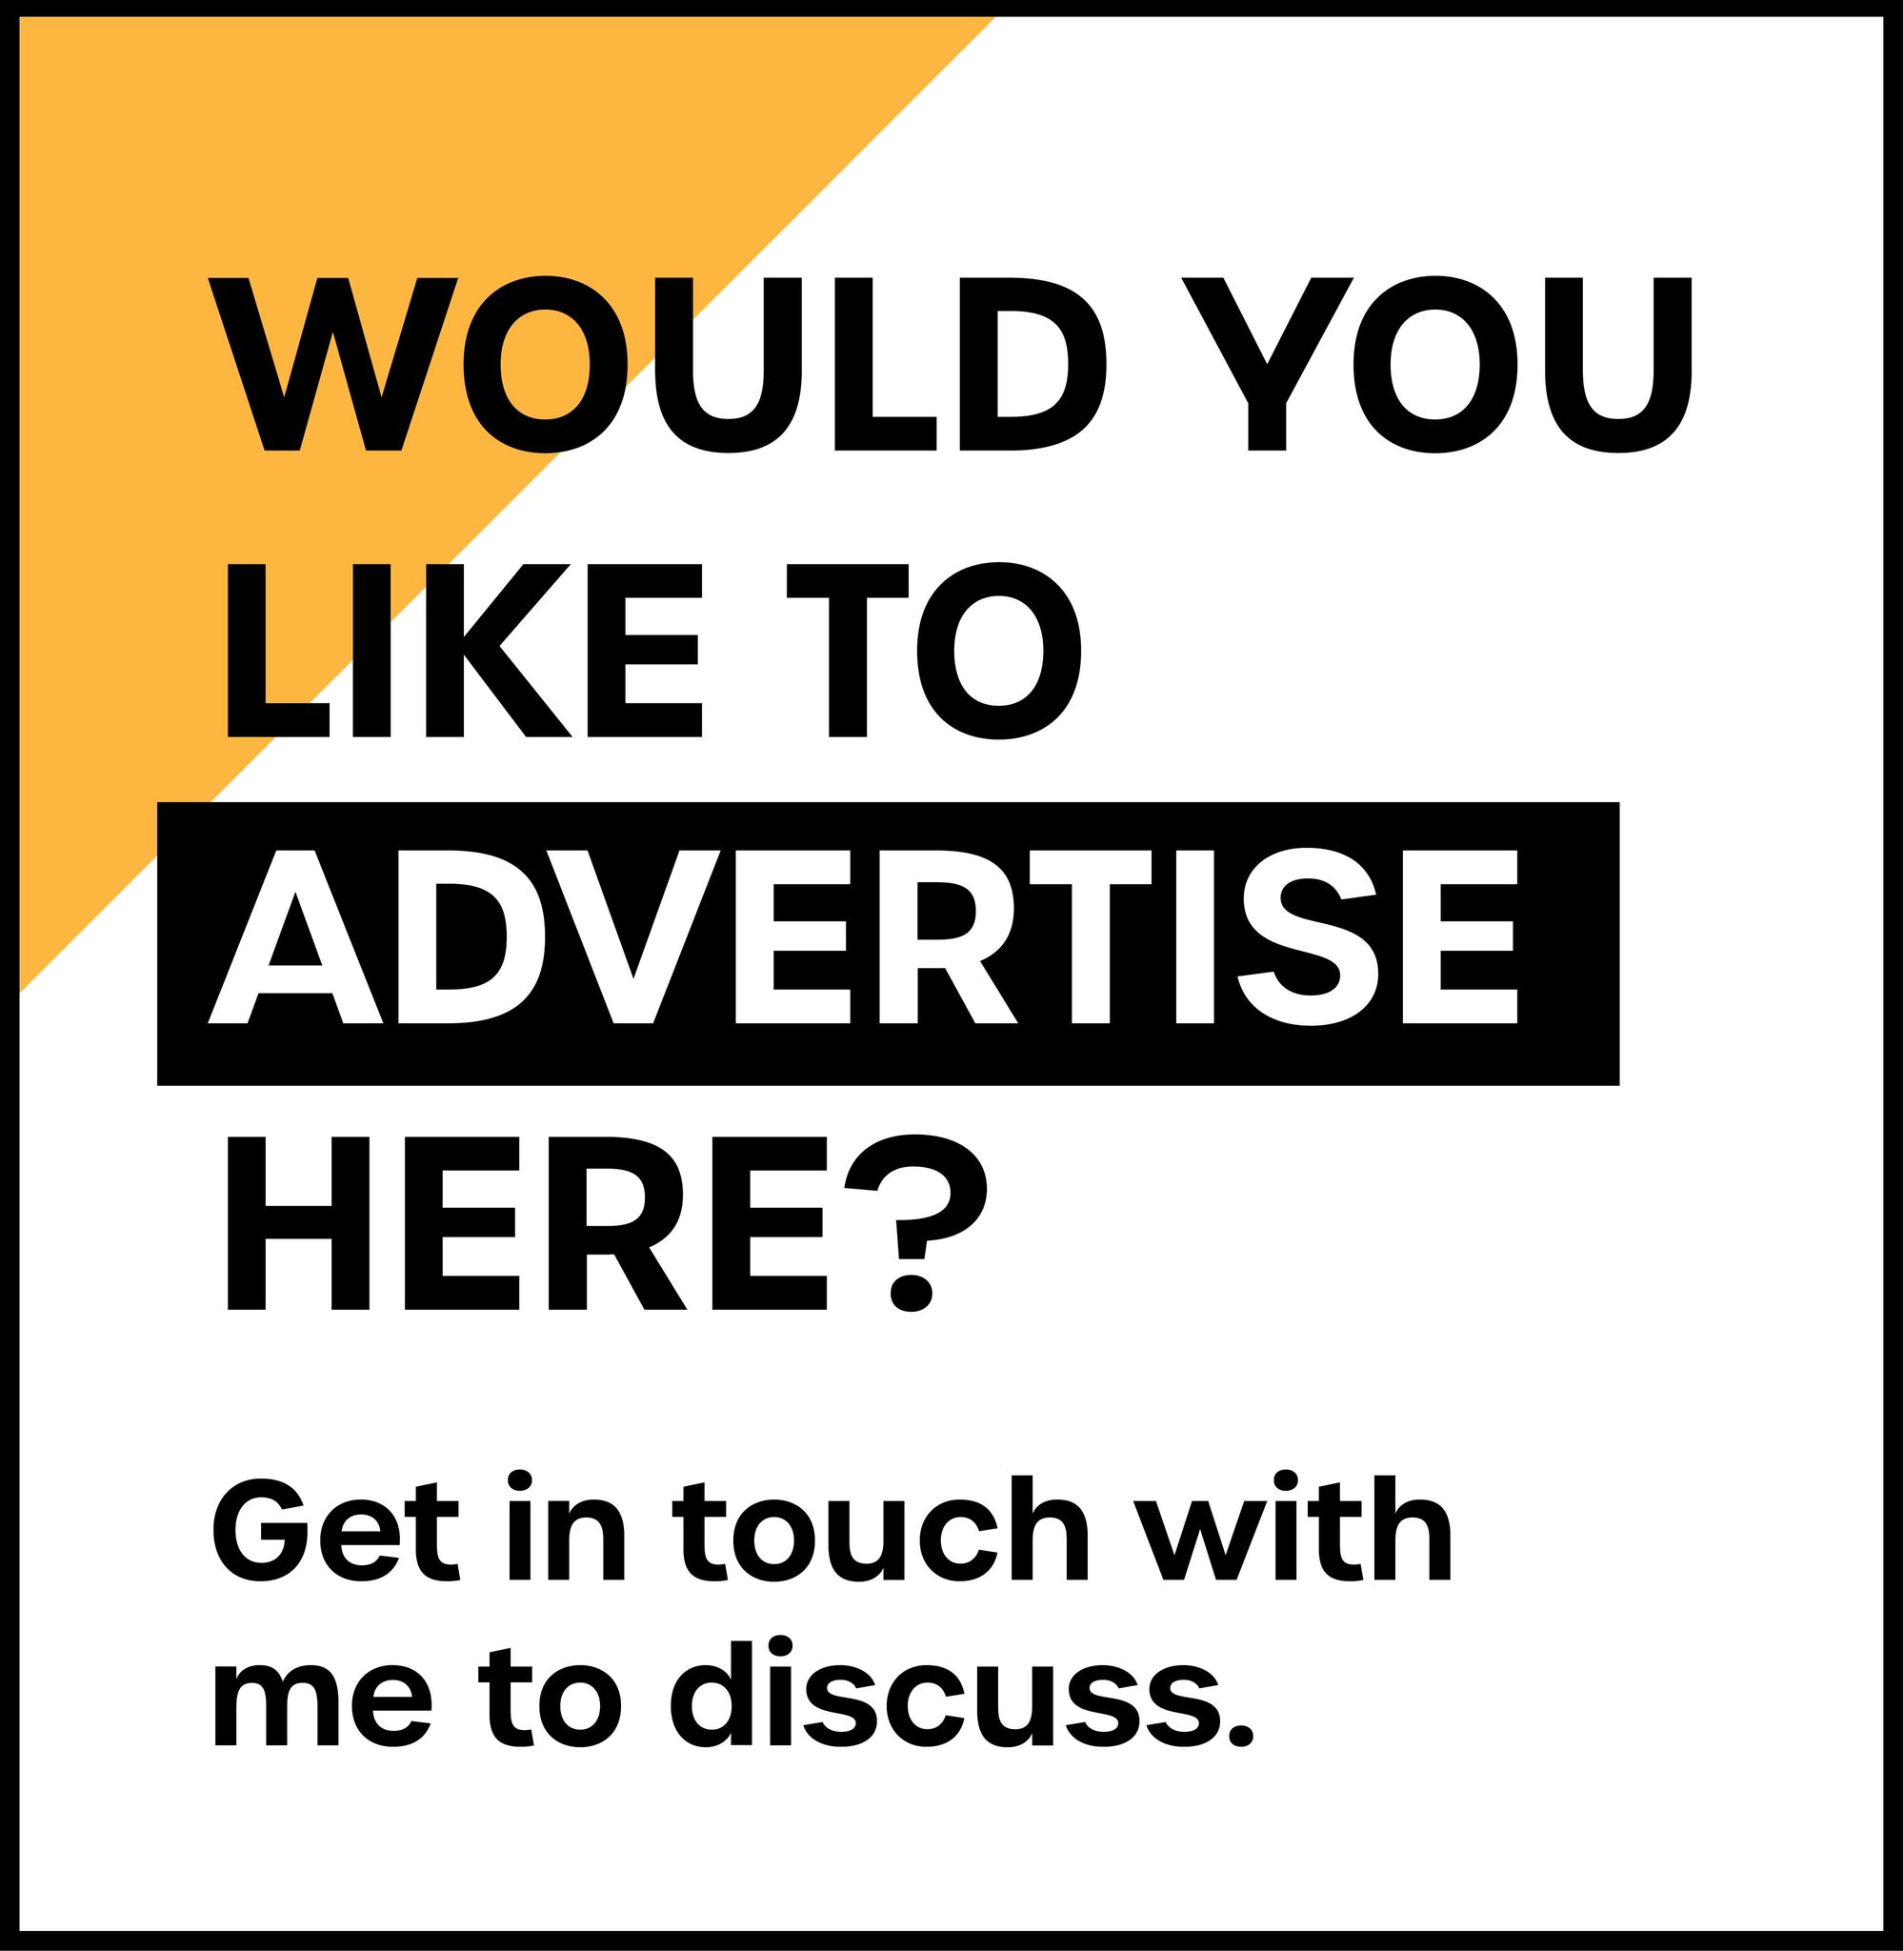 'Would you like to advertise here? Get in touch with me to discuss' on a white and yellow background.